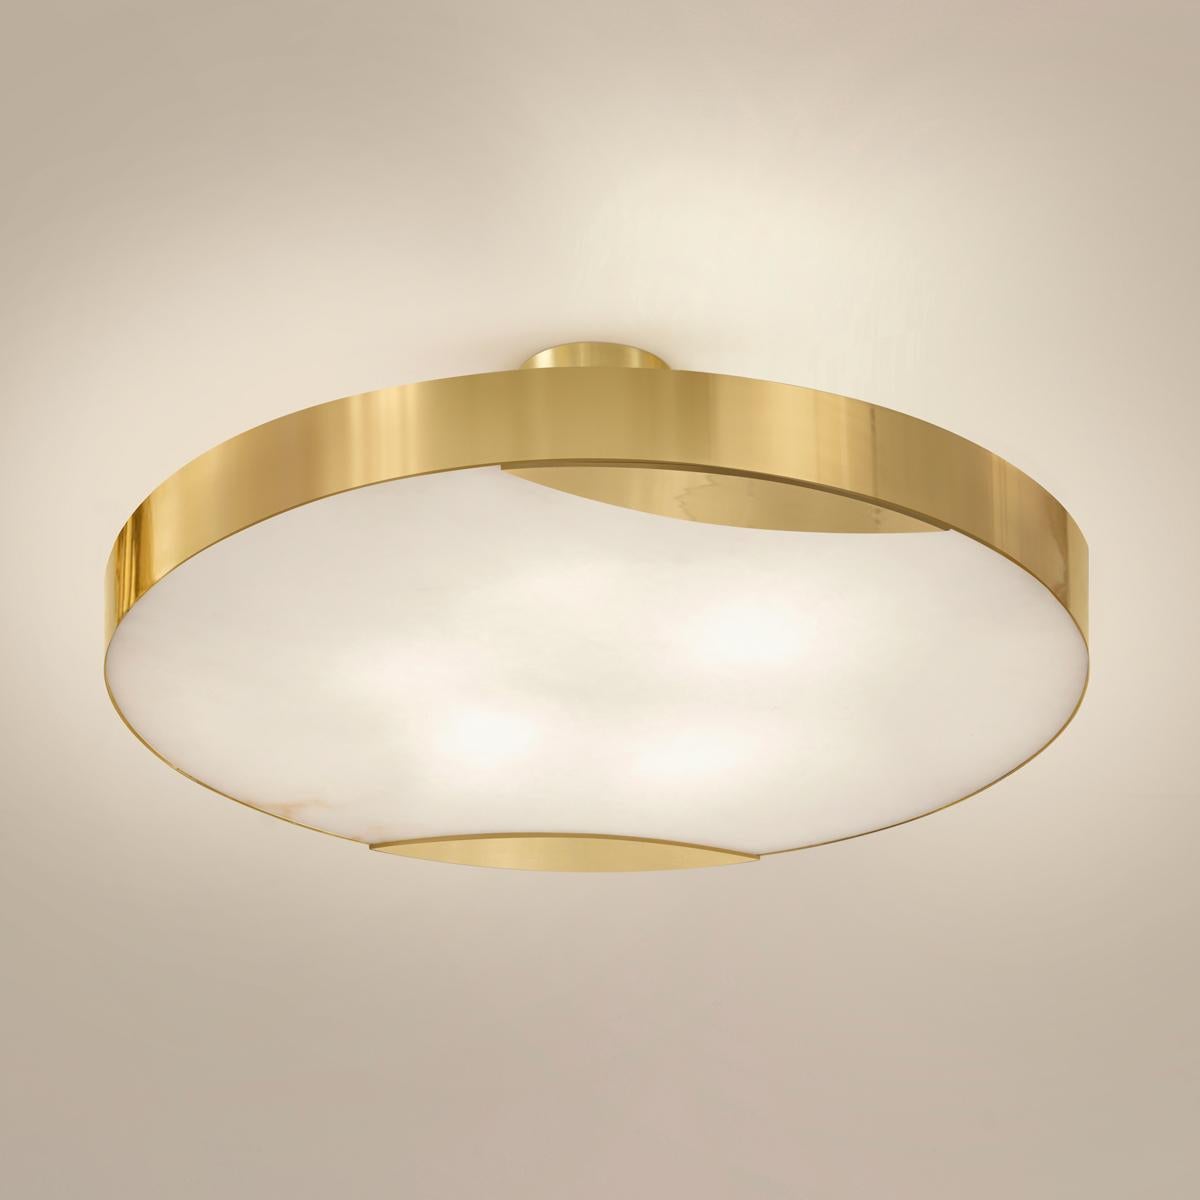 Contemporary Cloud N.1 Ceiling Light by Gaspare Asaro-Polished Nickel Finish For Sale